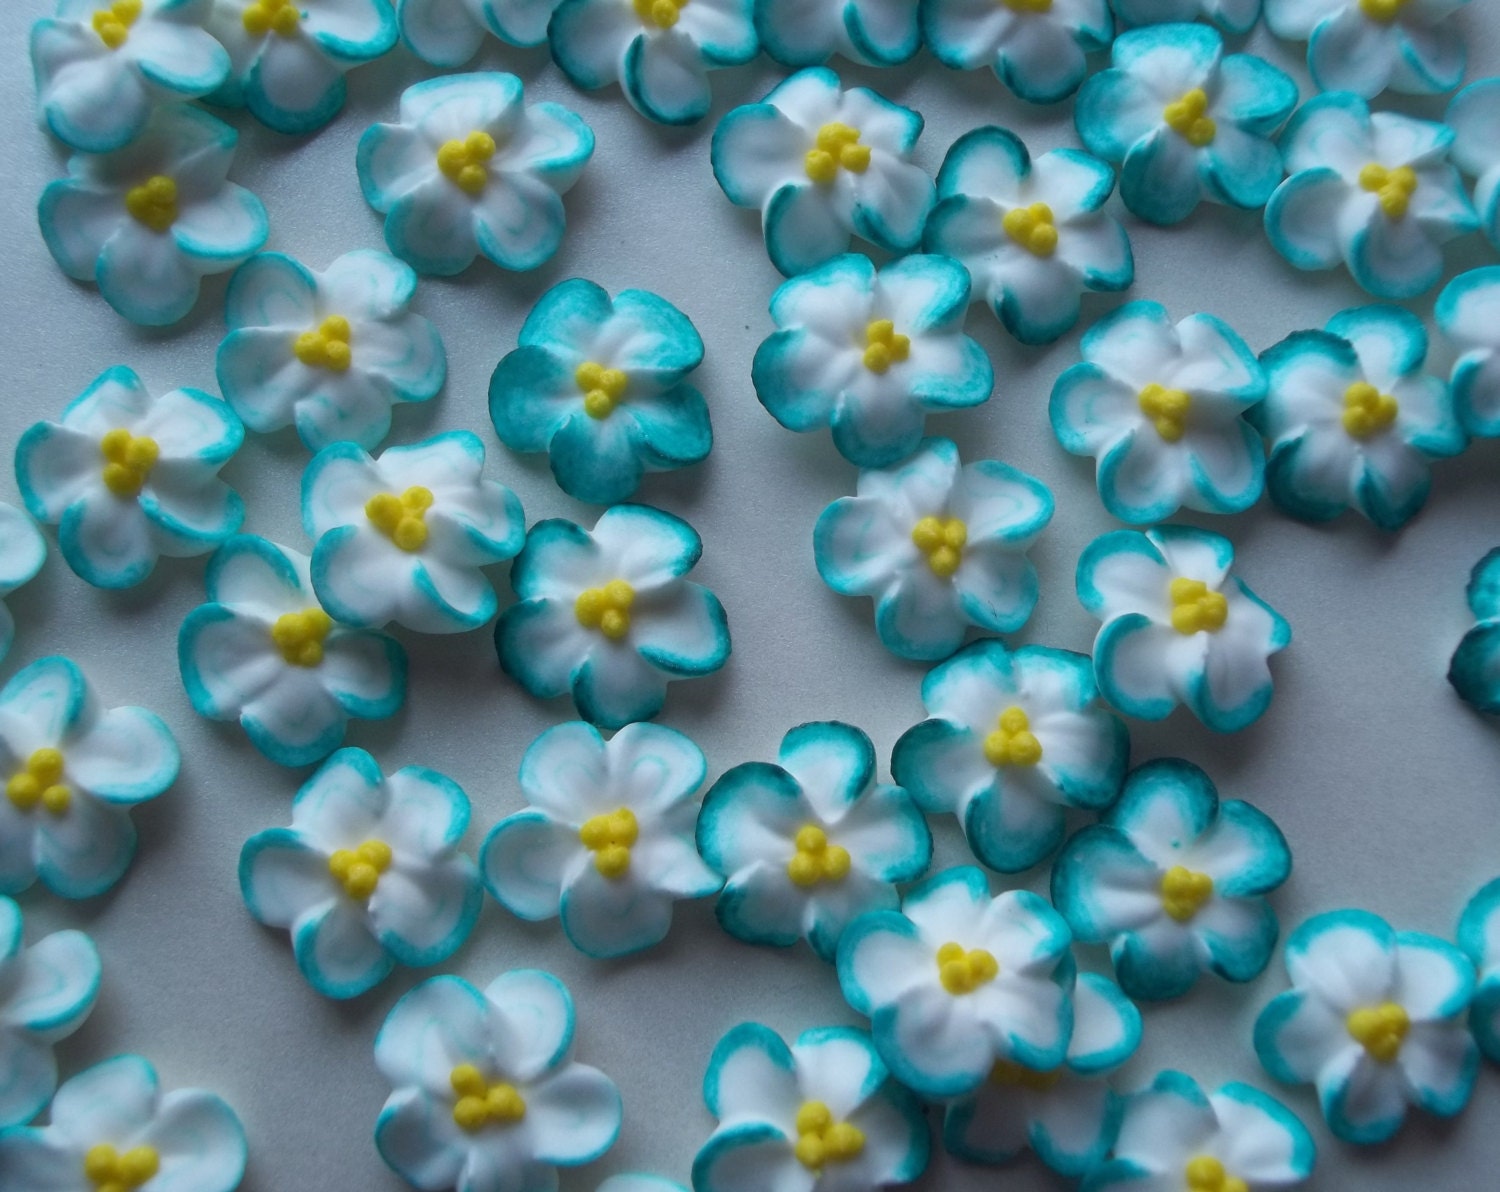 Teal-tipped white royal icing flowers by SweetSarahsBoutique